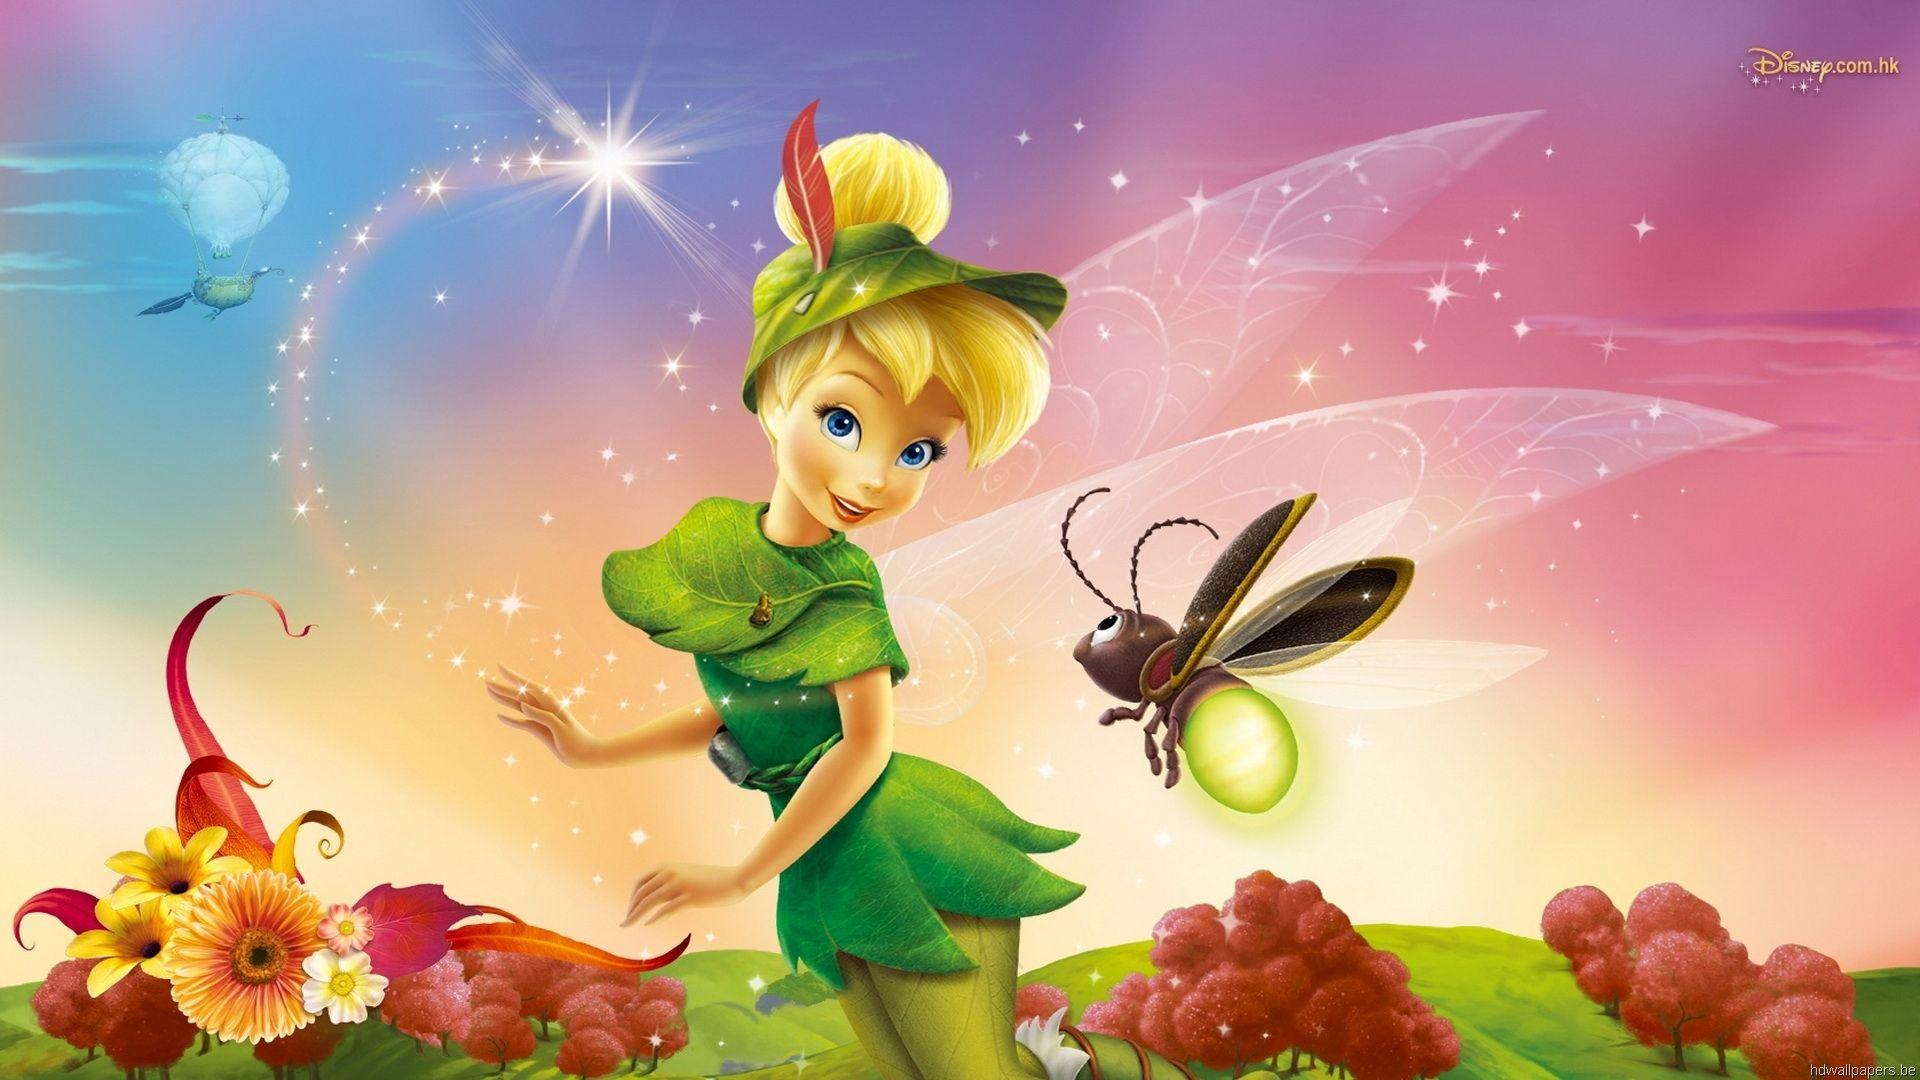 Wallpaper Cartoon Tinkerbell D Animated Disne With Tingkerbell Image